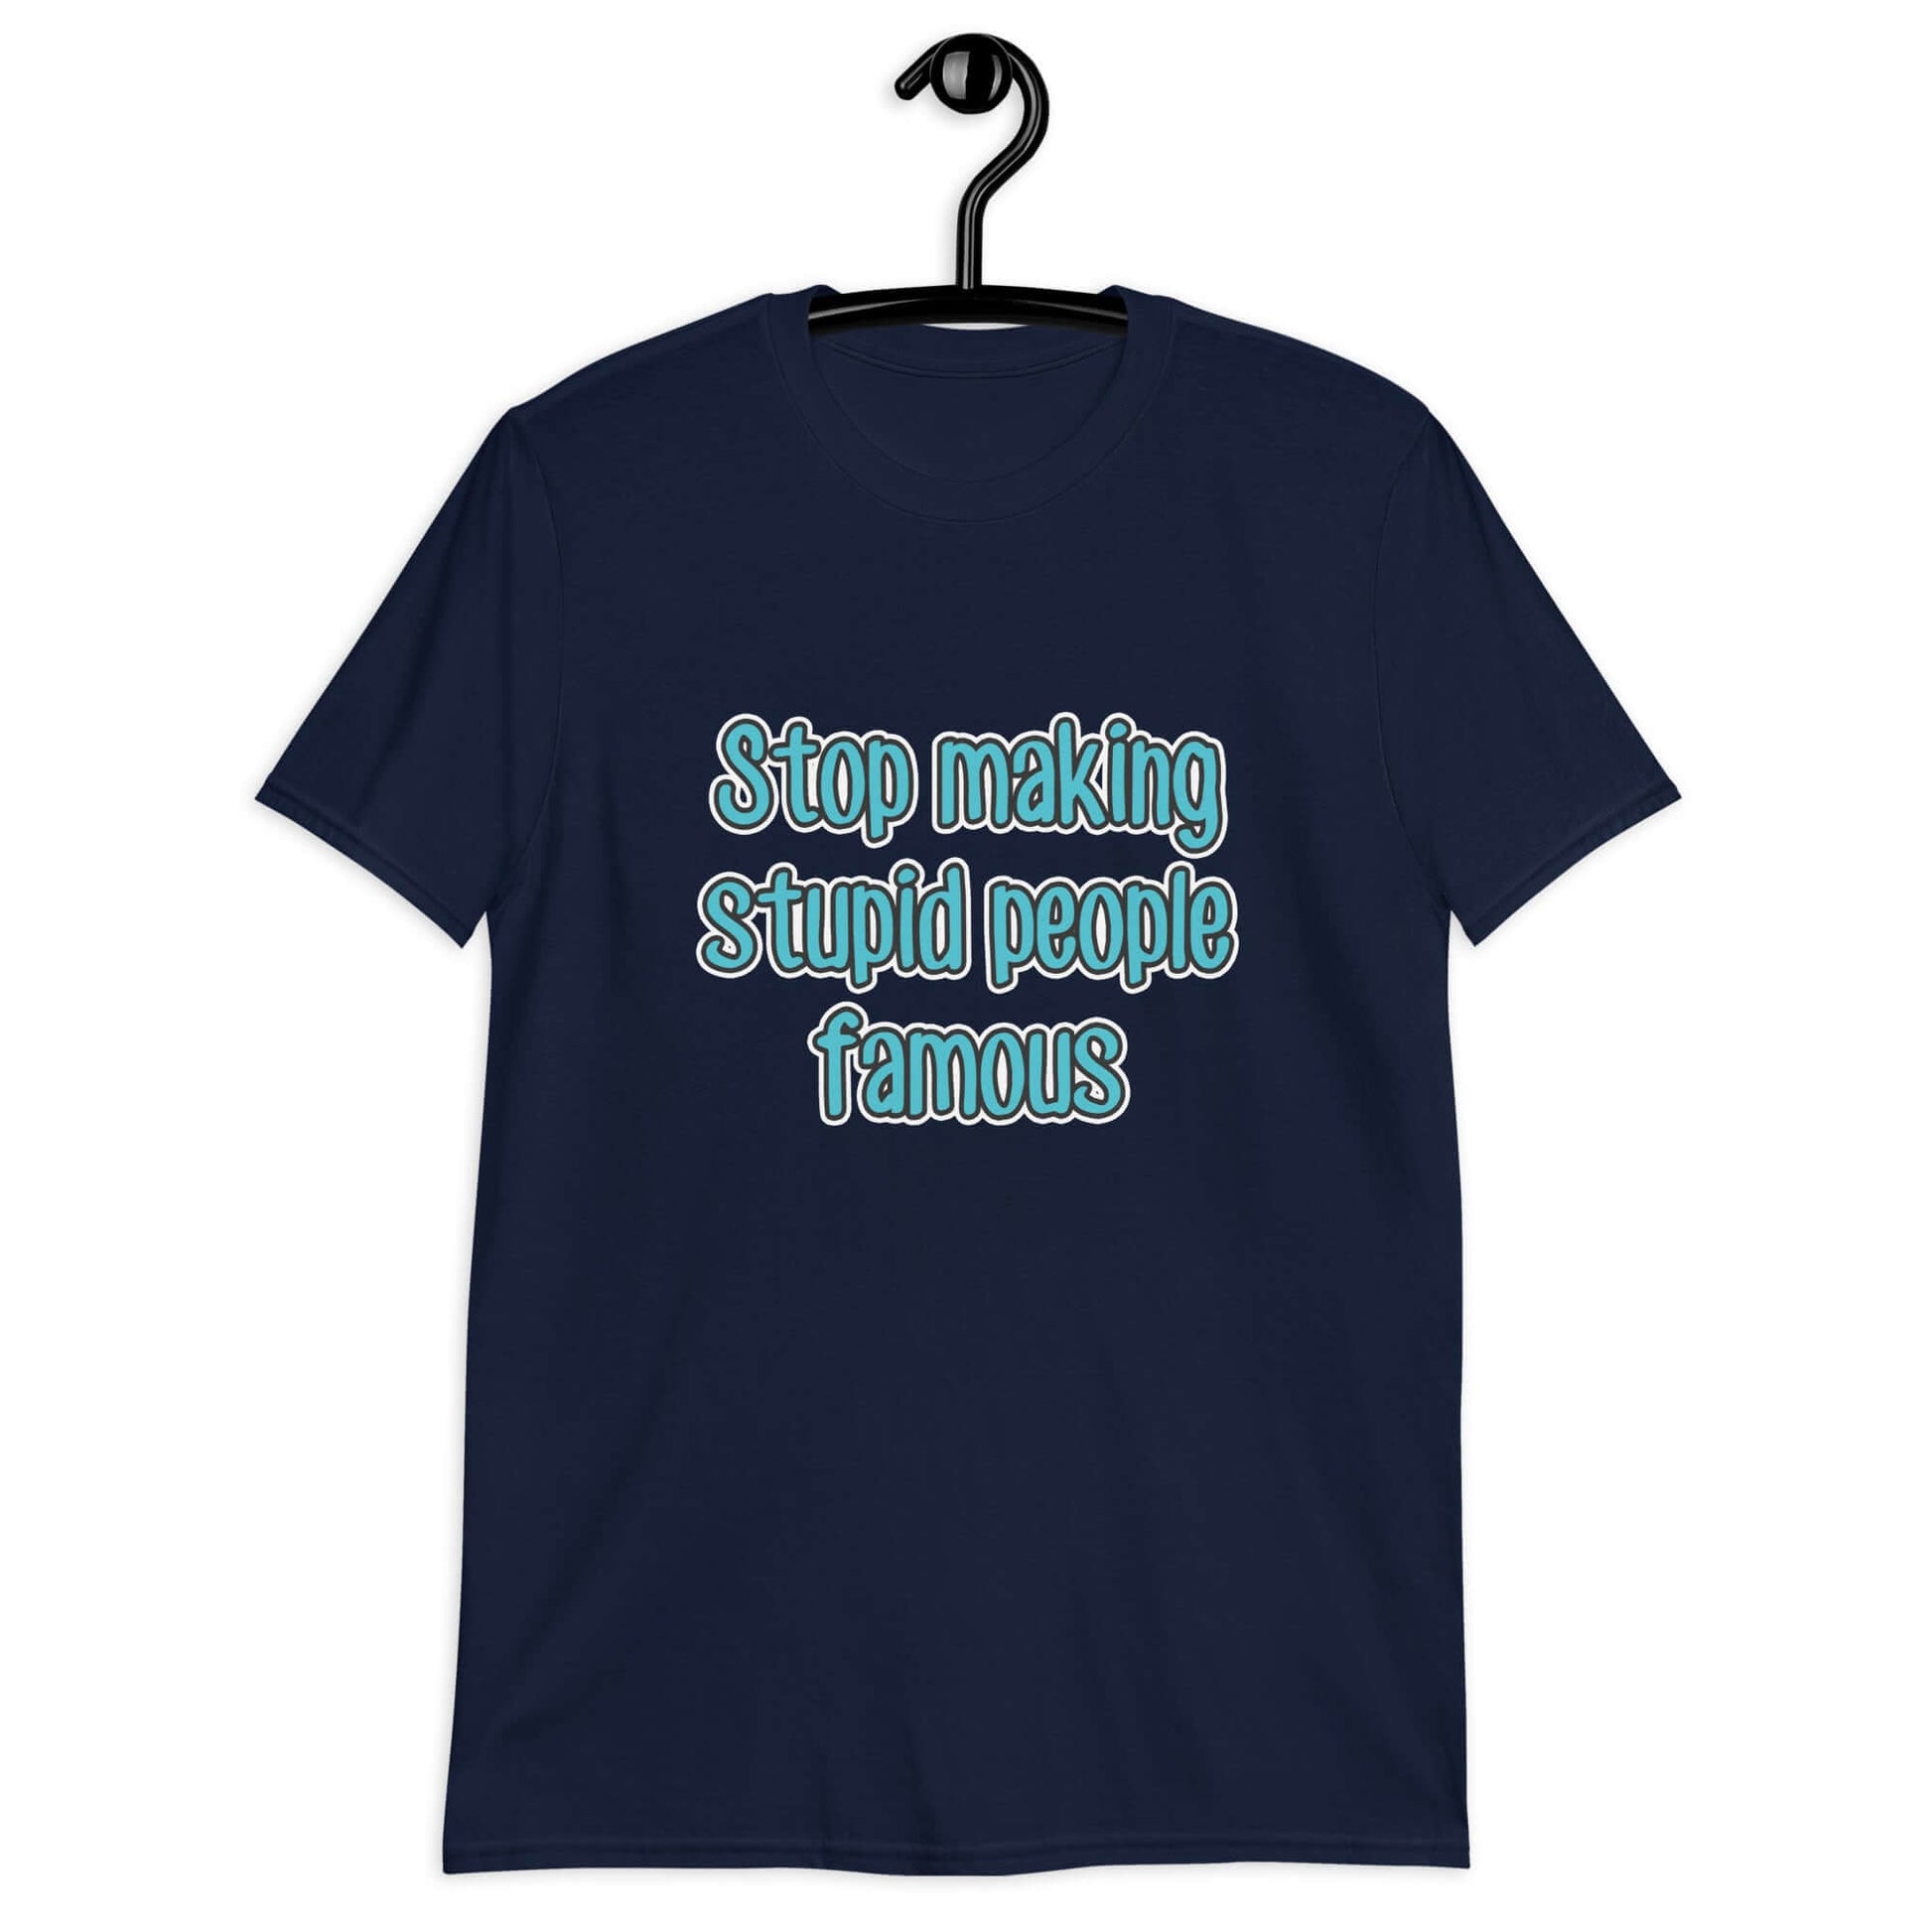 Navy blue t-shirt with the phrase Stop making stupid people famous printed on the front. The text is turquoise. 